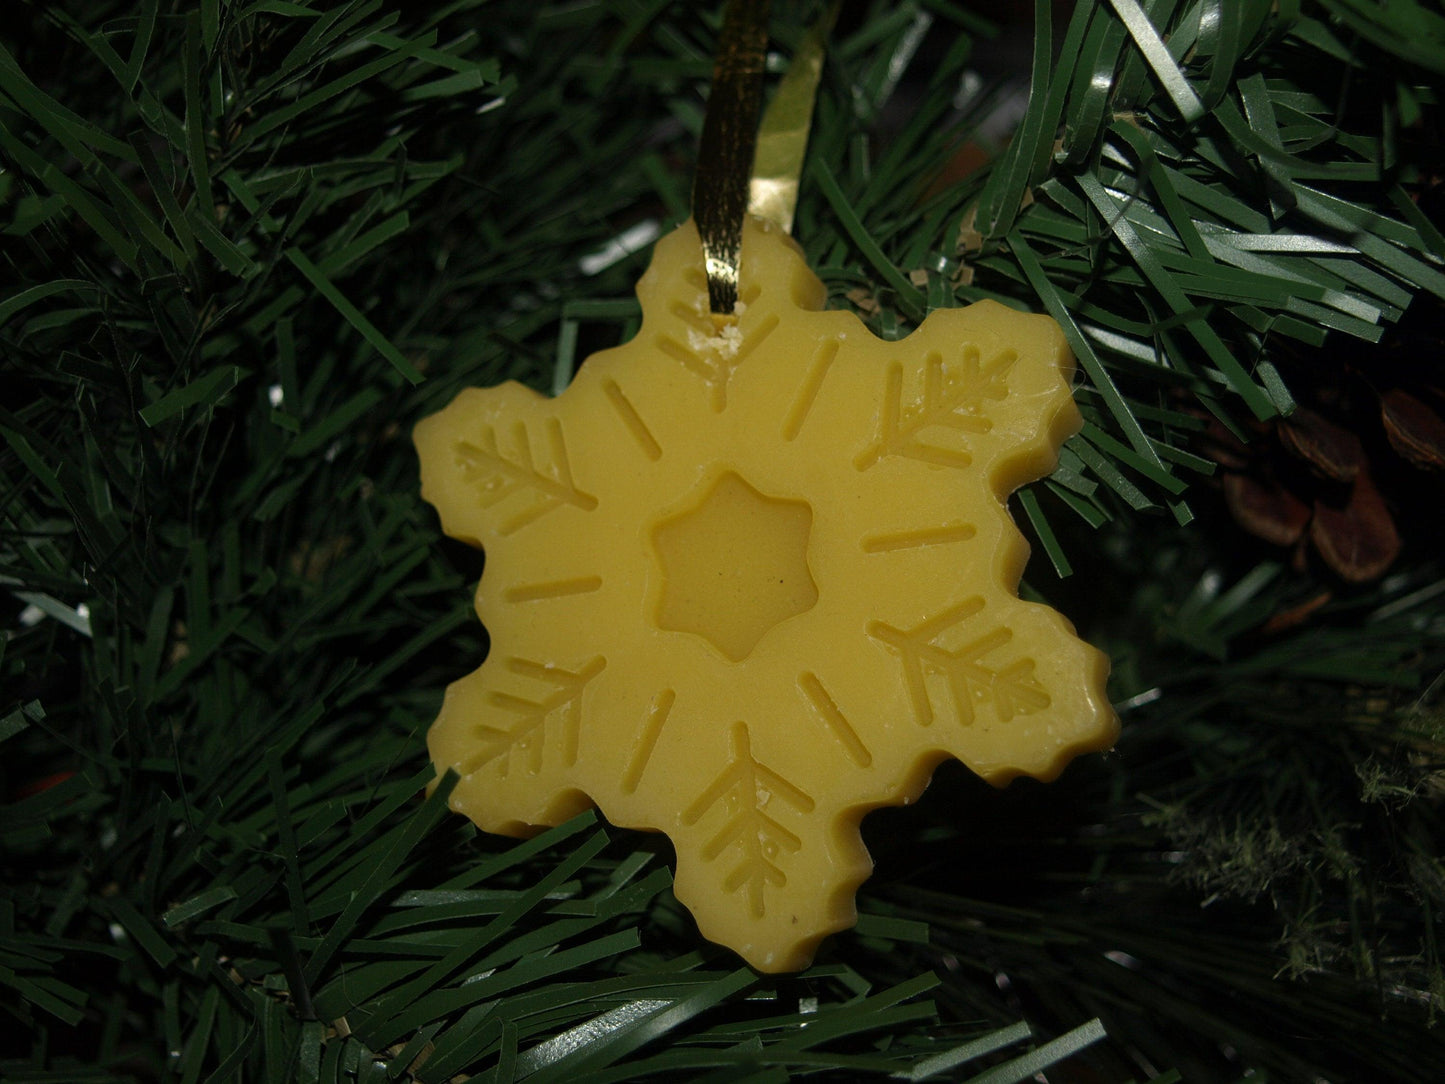 Beeswax Melts Snowflakes Christmas Tree Decorations Ornament 100% Natural Product Living Scent Eco Friendly UK - 2 little bees